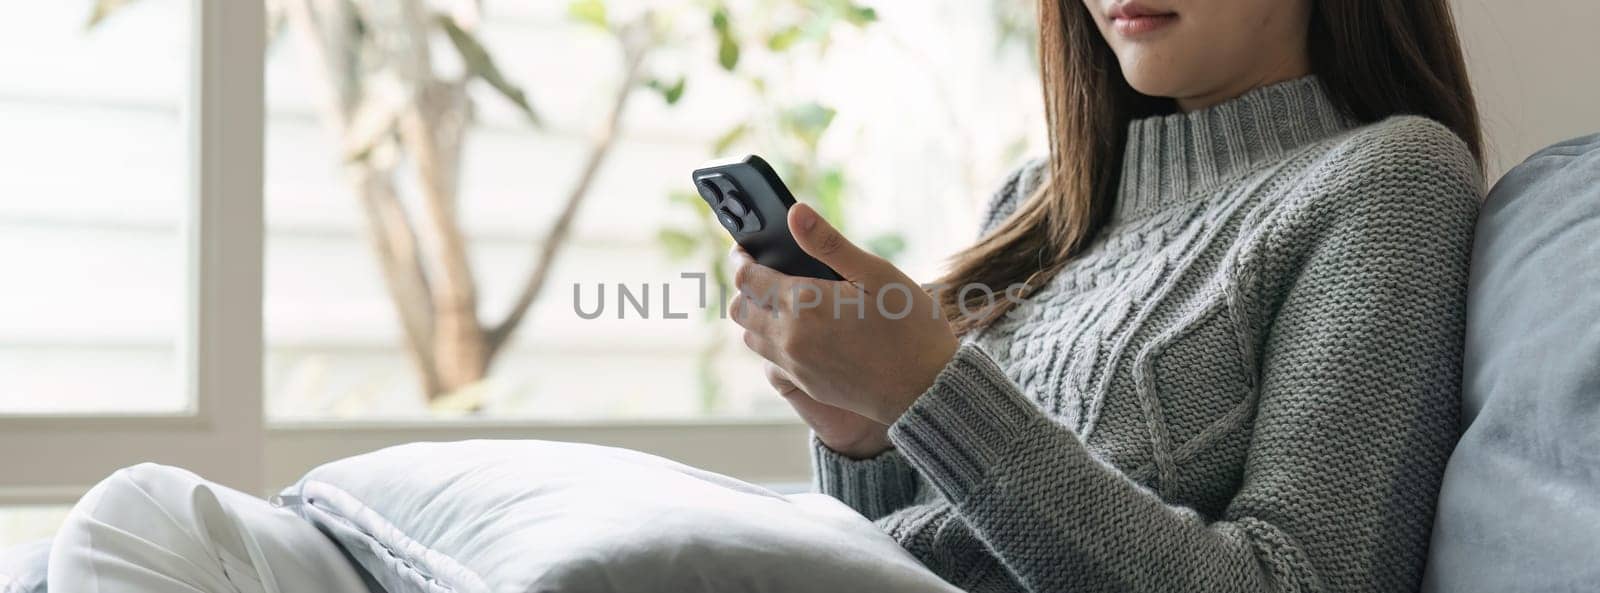 Young asian woman using mobile phone. Social media messaging Woman sitting on sofa playing with phone.